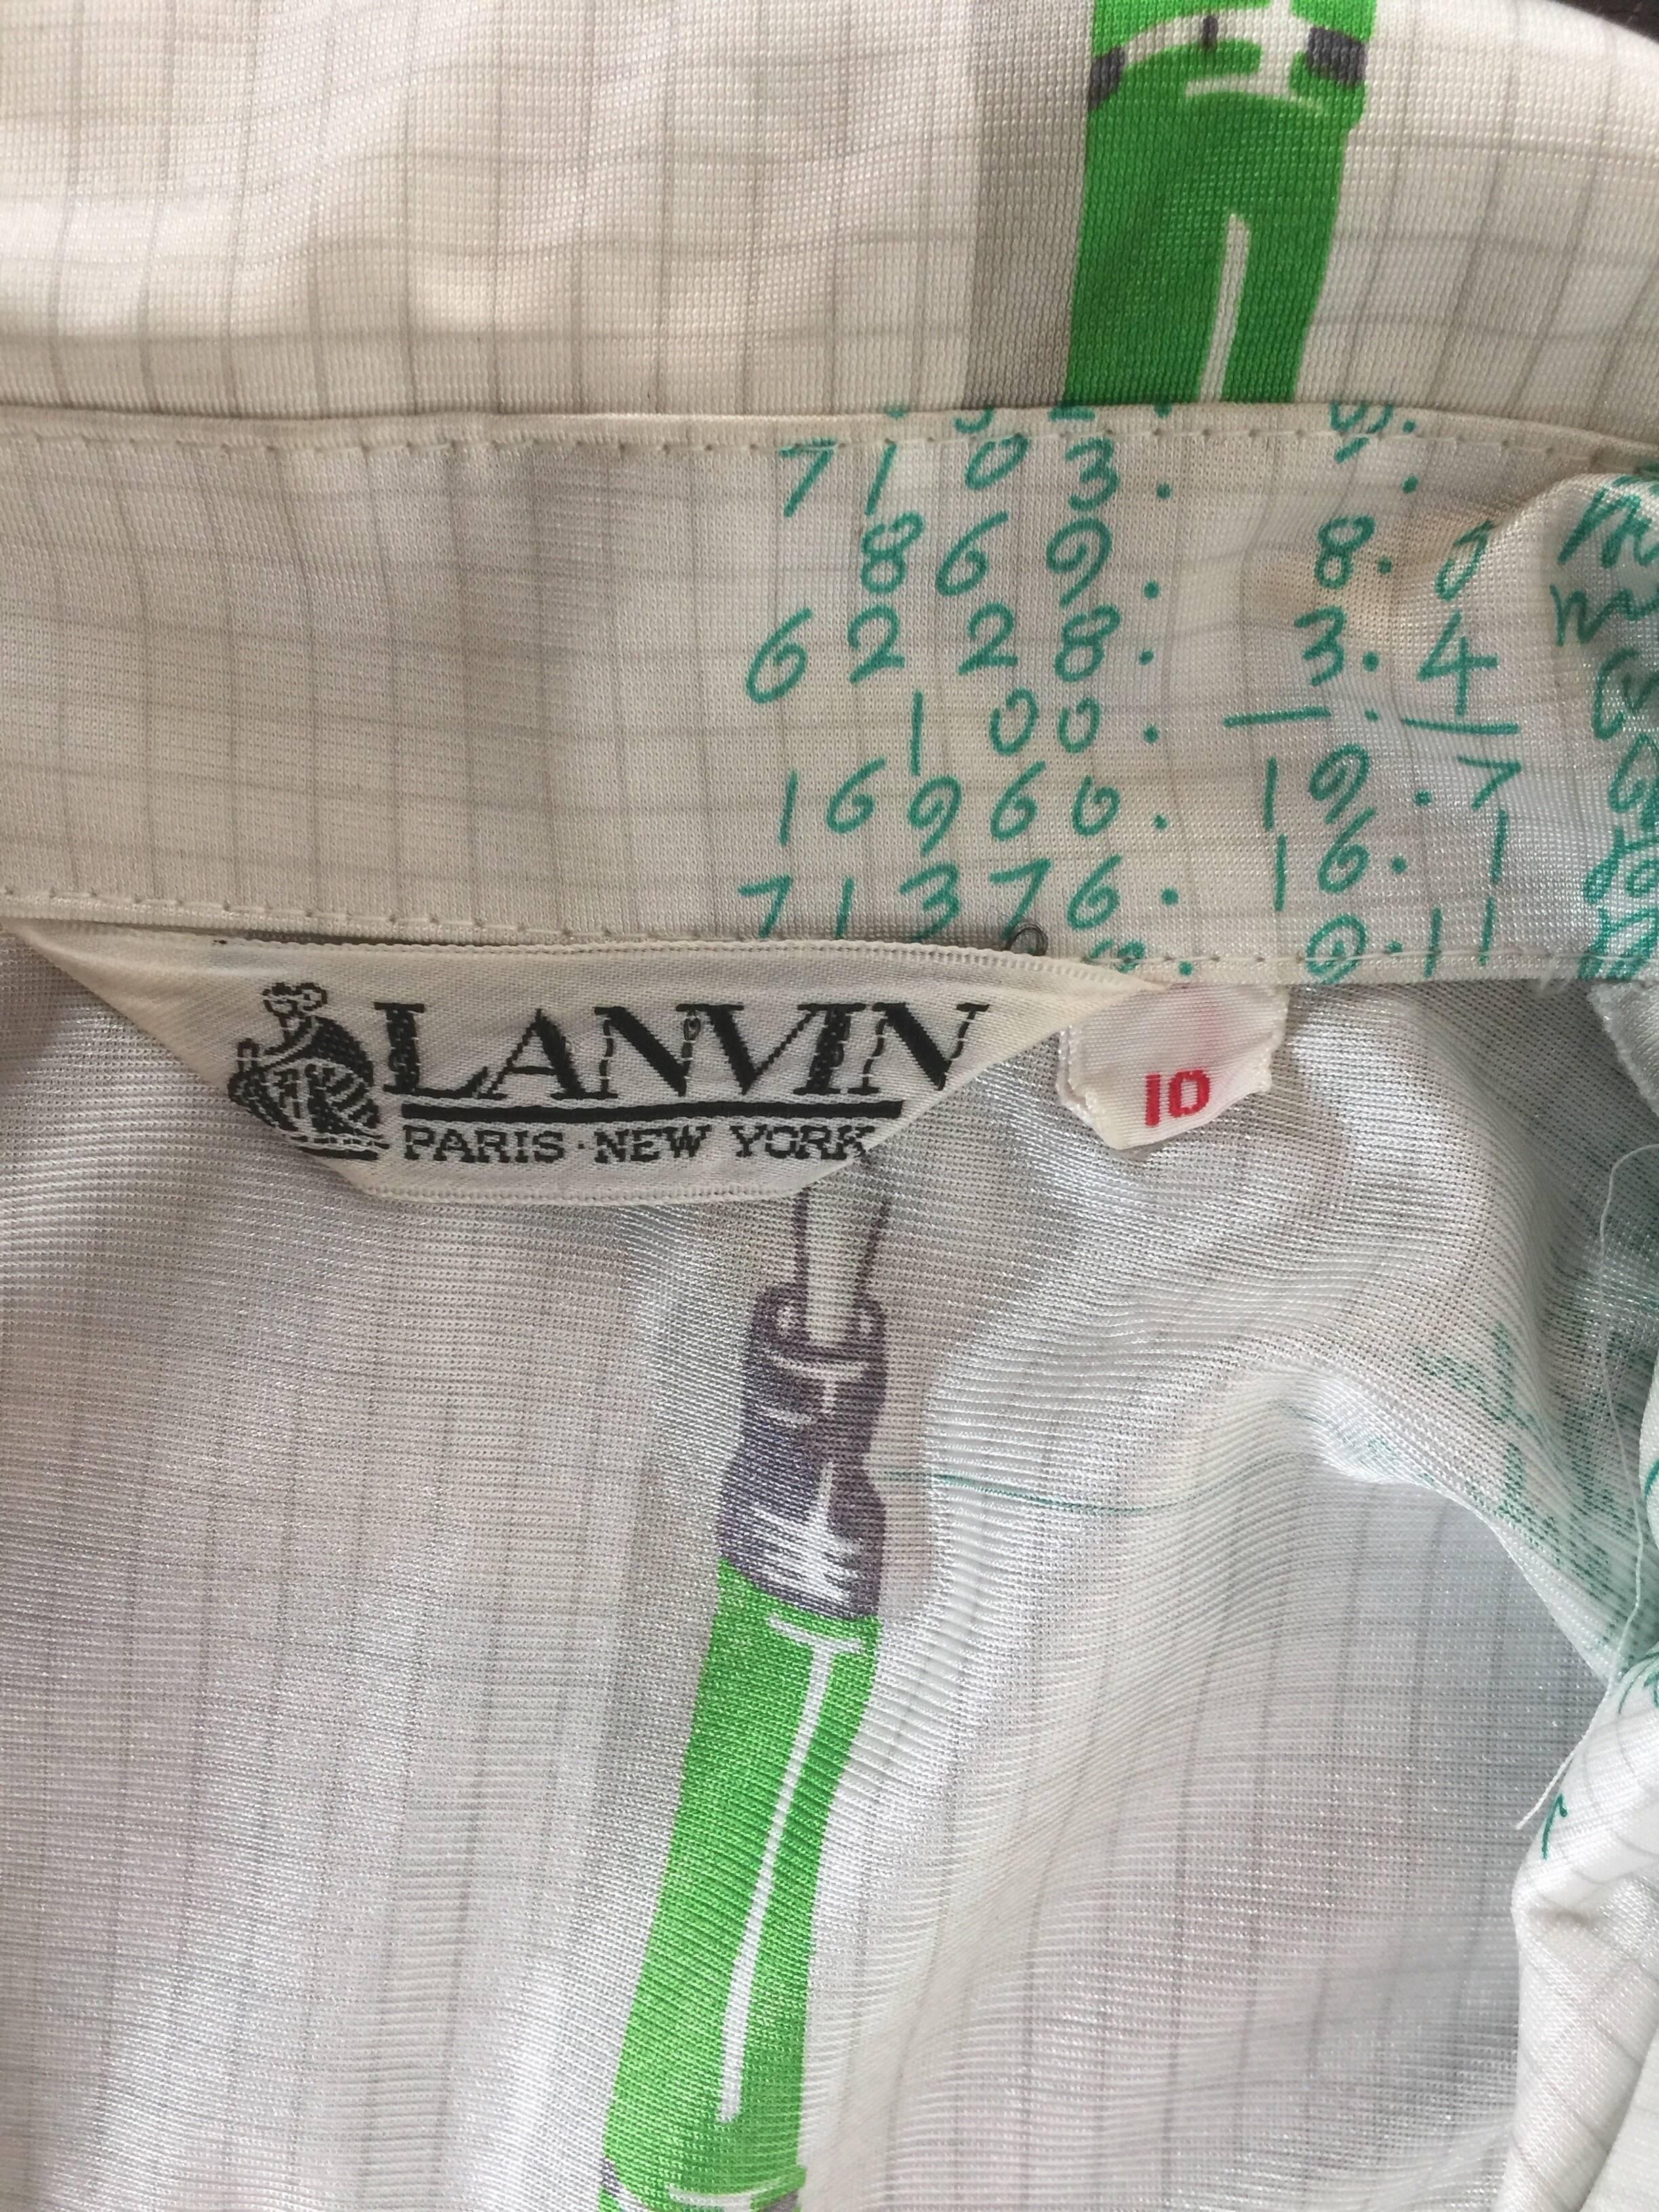 Lanvin 1970s mathematician printed dress For Sale 2